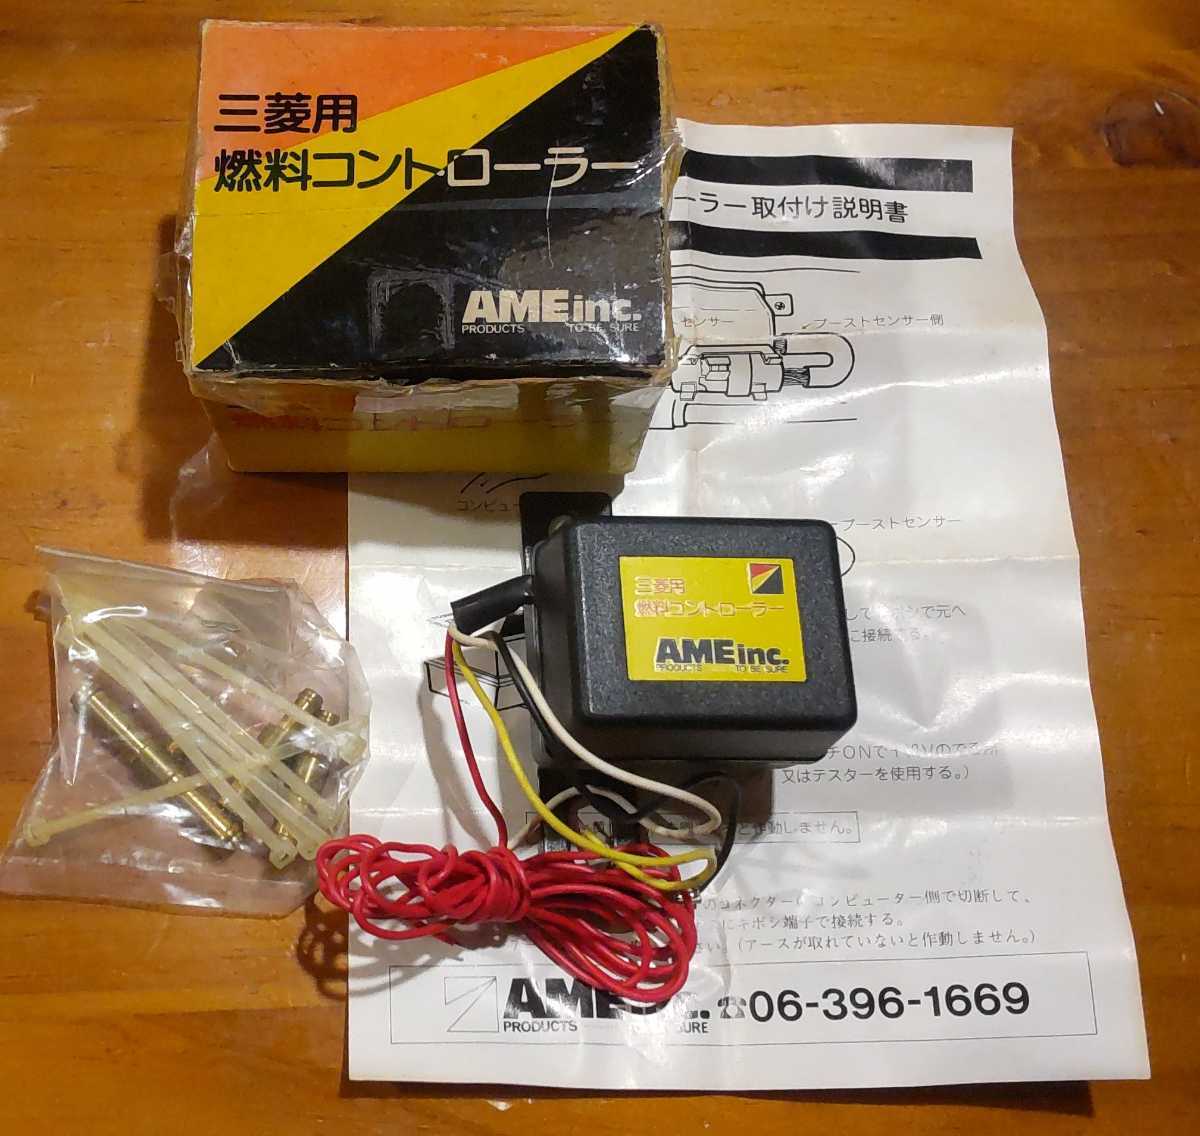  ultra rare!! at that time thing AMEinc. made Mitsubishi Lancer EX turbo for fuel controller 